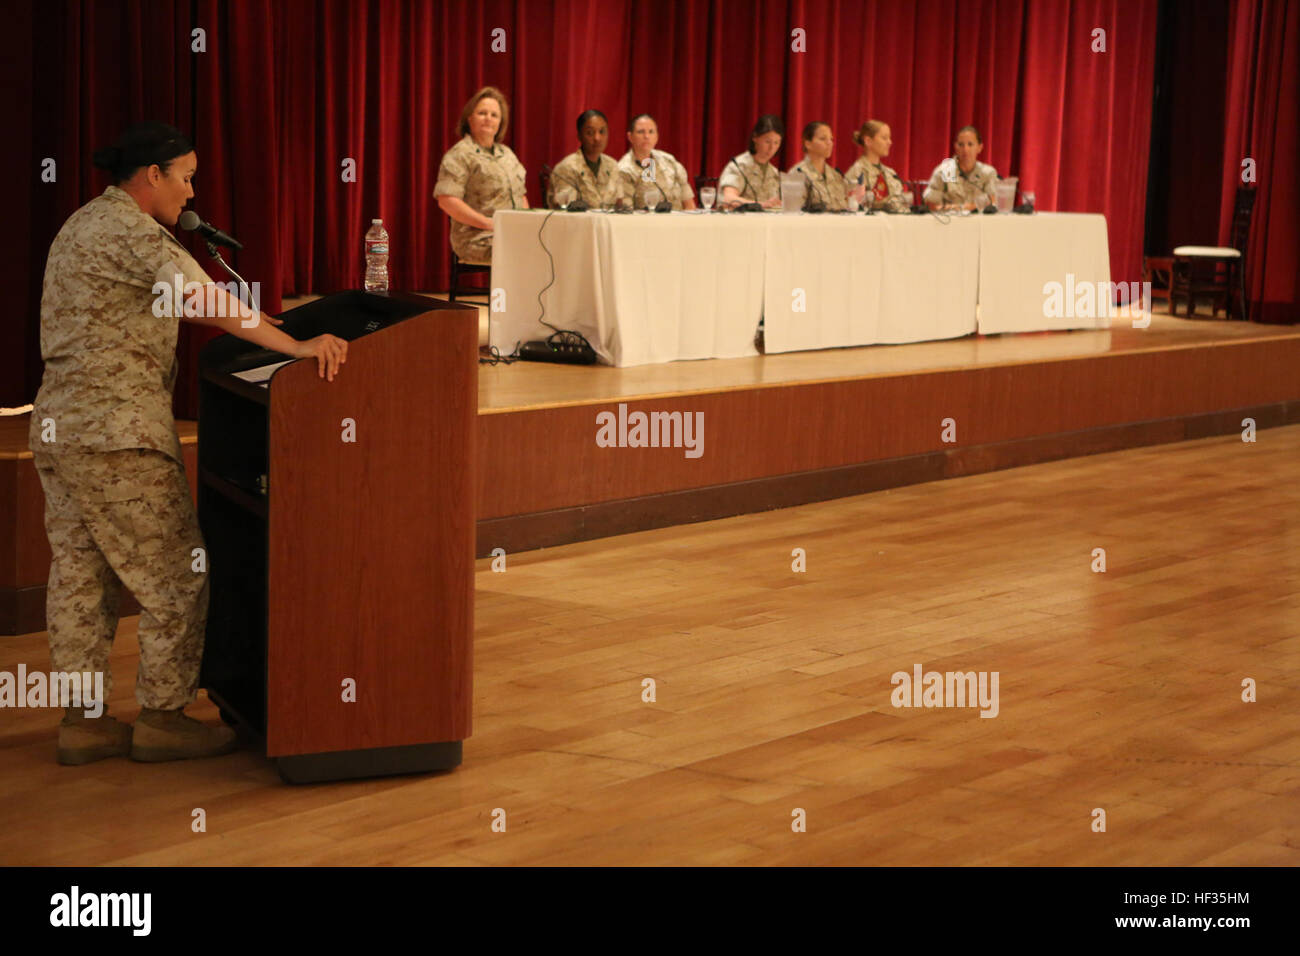 Master Sgt. Bonnie Diaz, a Marine with I Marine Expeditionary Force Headquarters Group Command Element, speaks to panel members at a women’s leadership symposium aboard Marine Corps Base Camp Pendleton, Calif., March 30, 2015. The symposium gave junior Marines a chance to speak to prominent military leaders to discuss gender equality and other topics. WomenE28099s leadership symposium discusses gender equality in the Corps 150330-M-LS369-005 Stock Photo